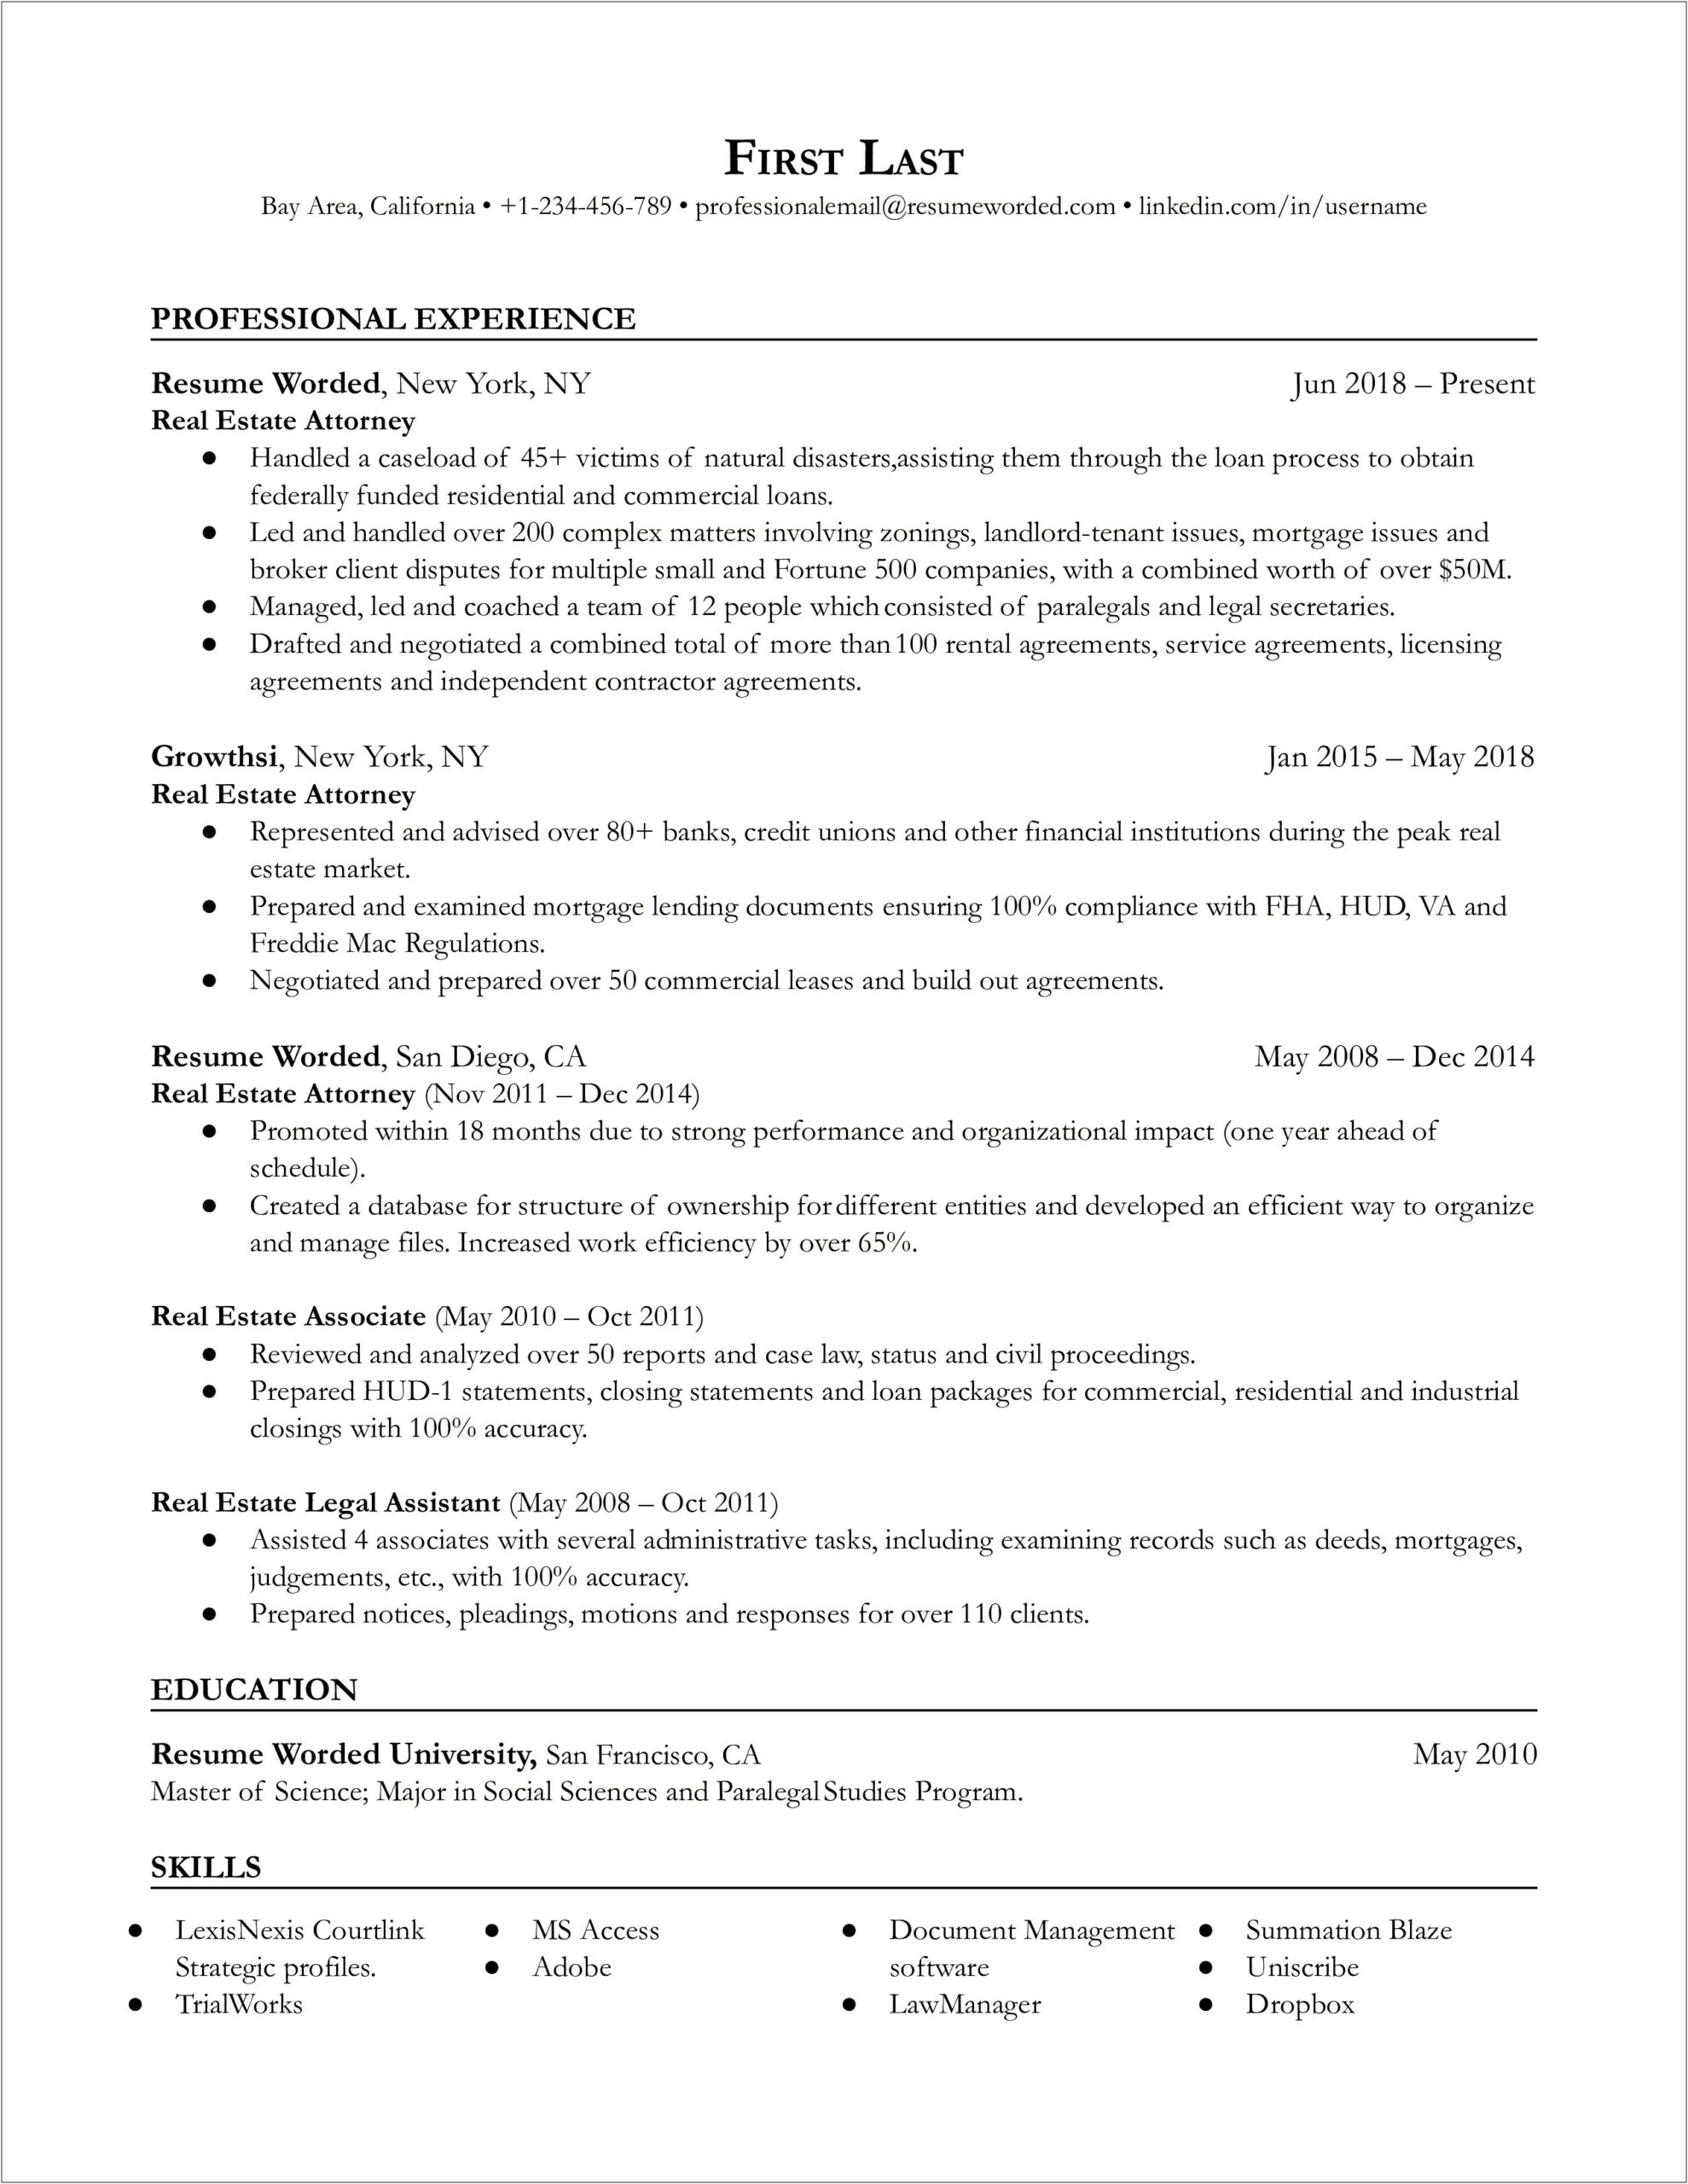 Skills To List On Resume For Real Estate